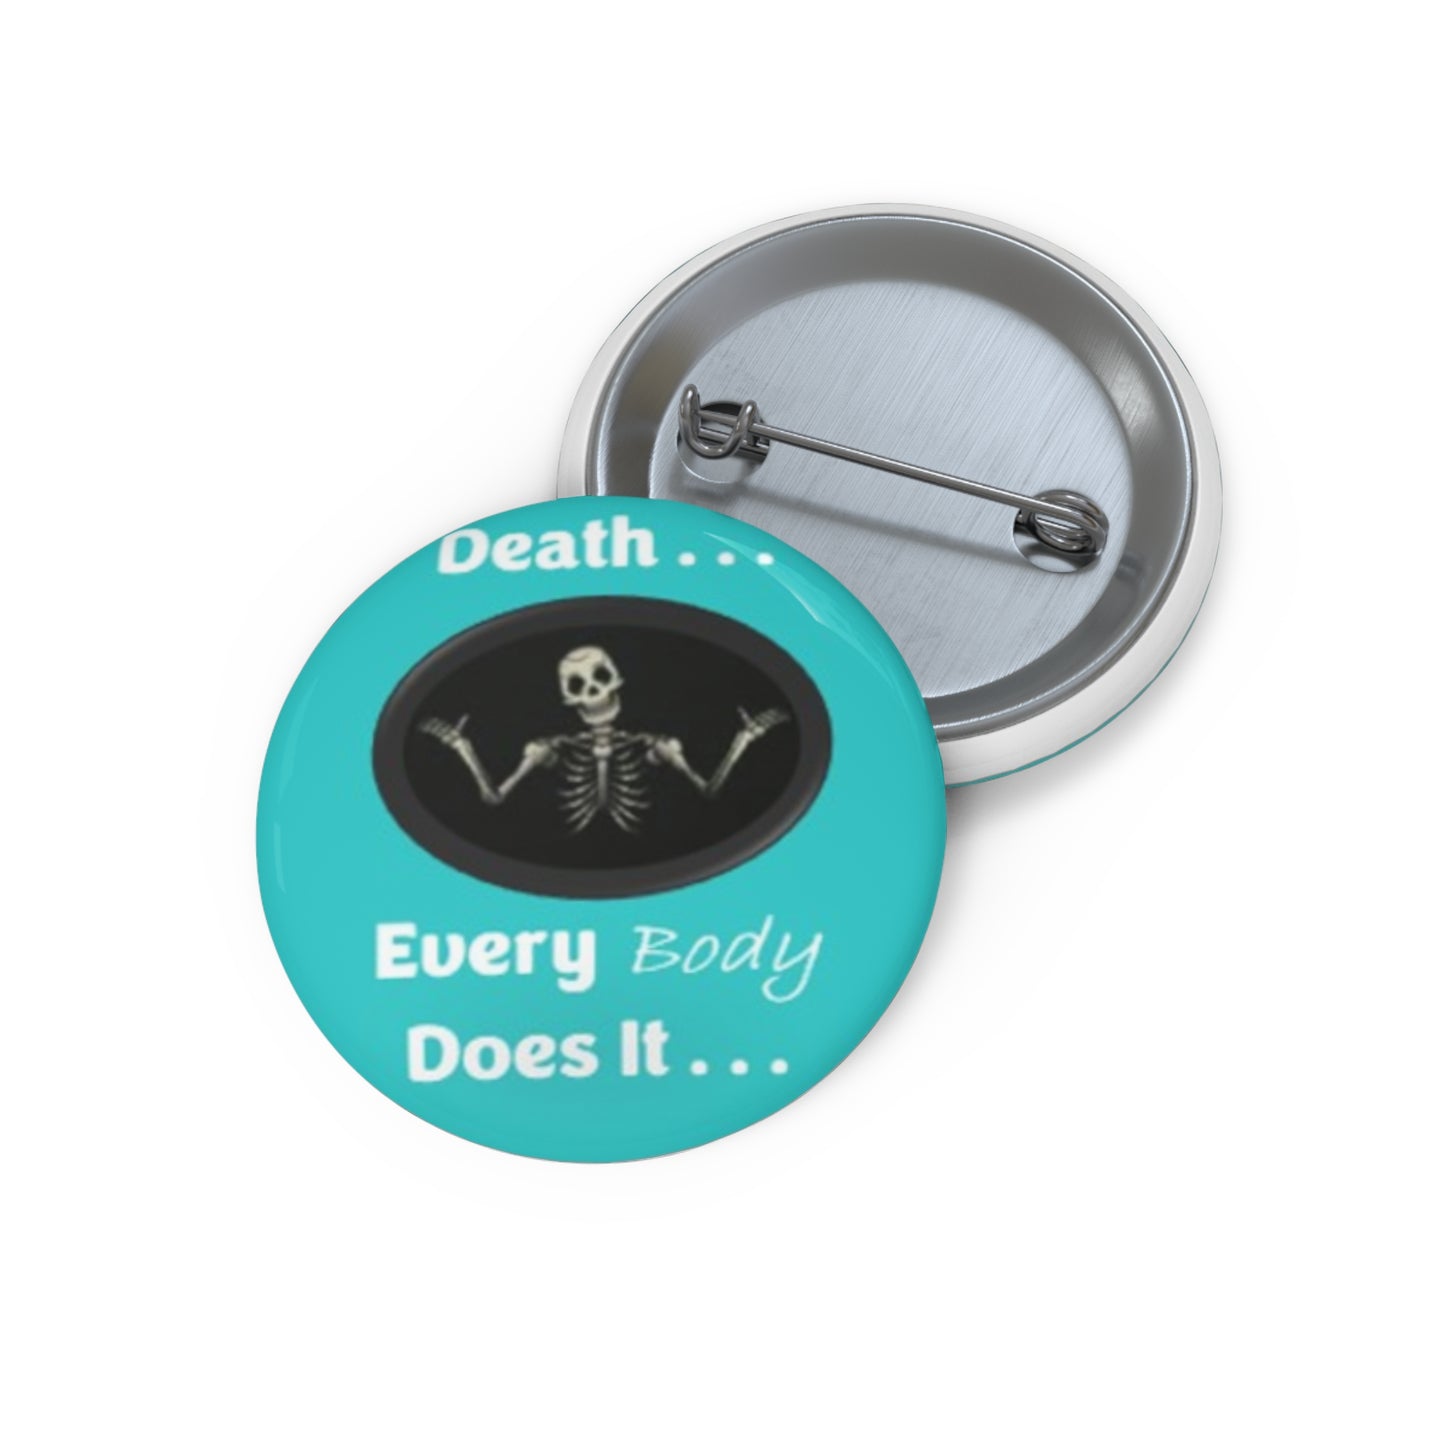 Death Everybody Does It - Teal - Custom Pin Buttons